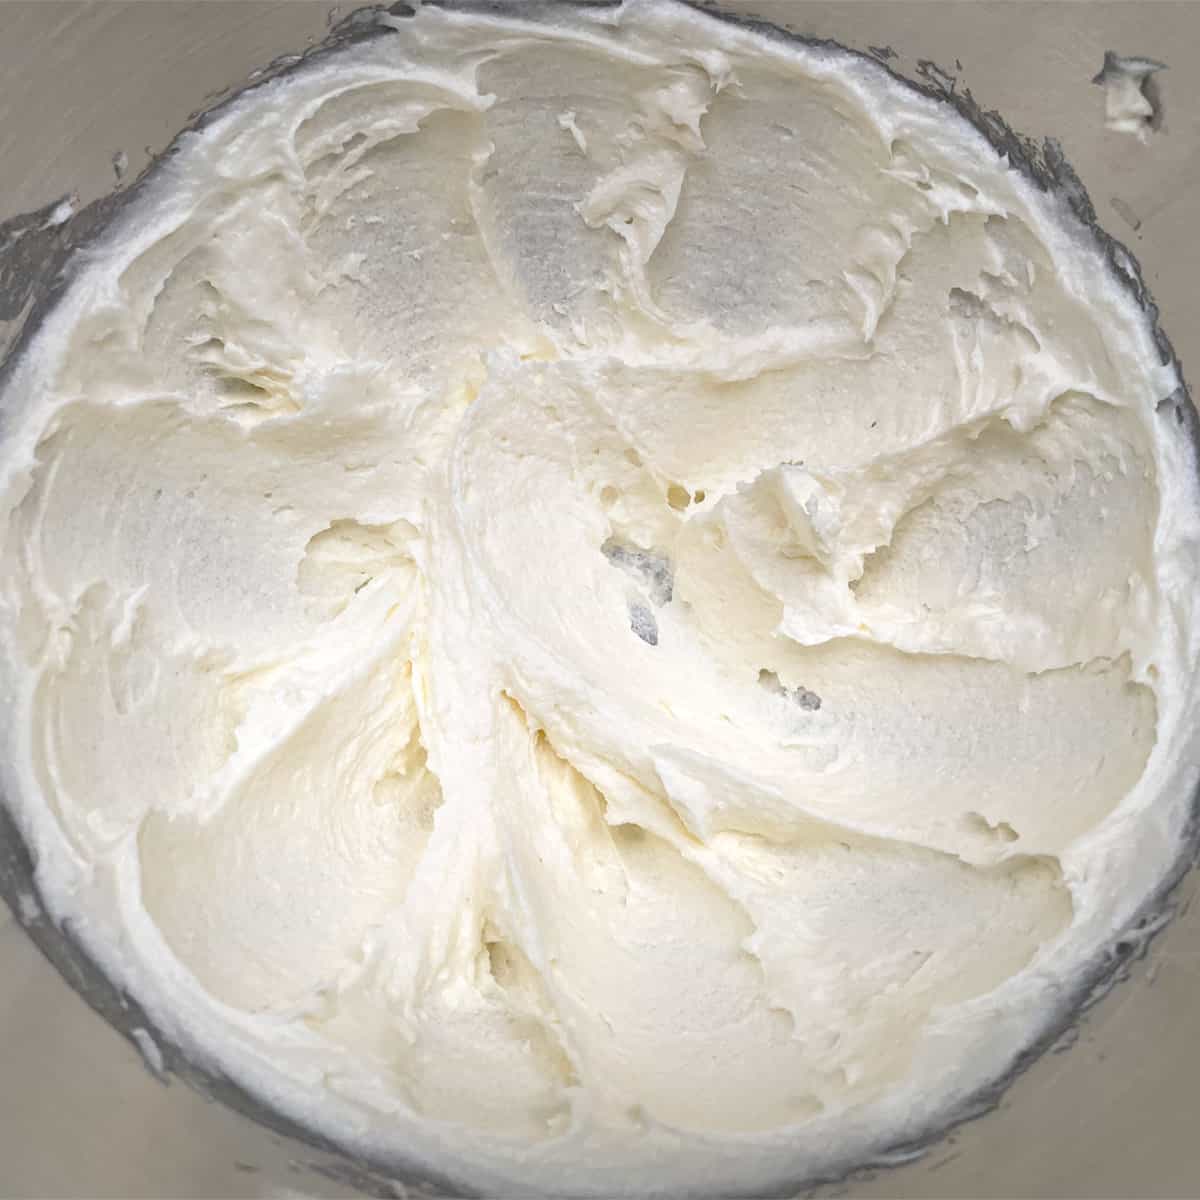 Butter, cream cheese, and sugar with soft peaks after mixing for 2 minutes.